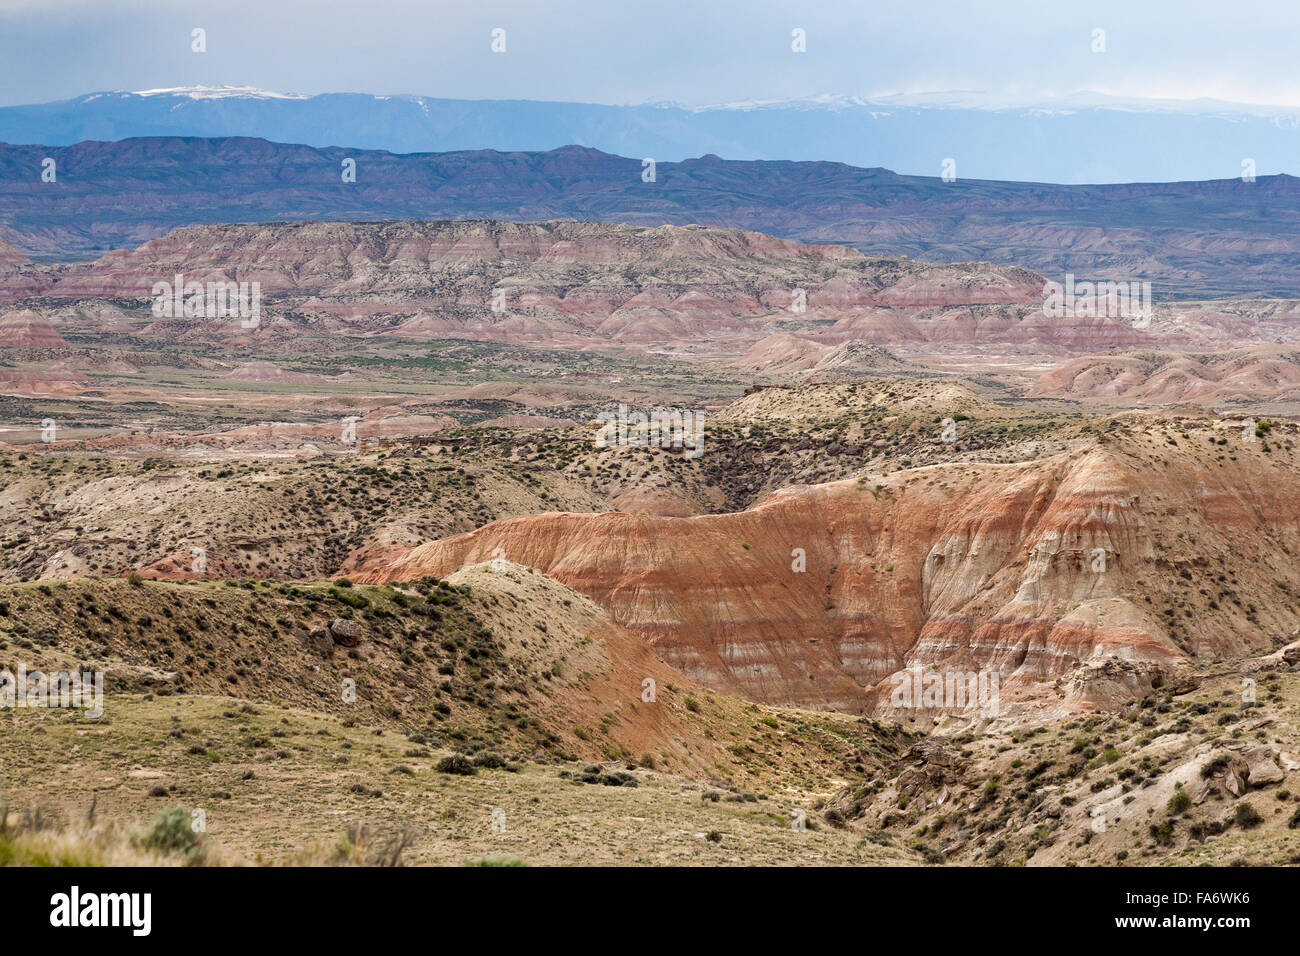 The Absaroka Mountains rise behind the badlands of the Bighorn Basin in north-central Wyoming. Stock Photo